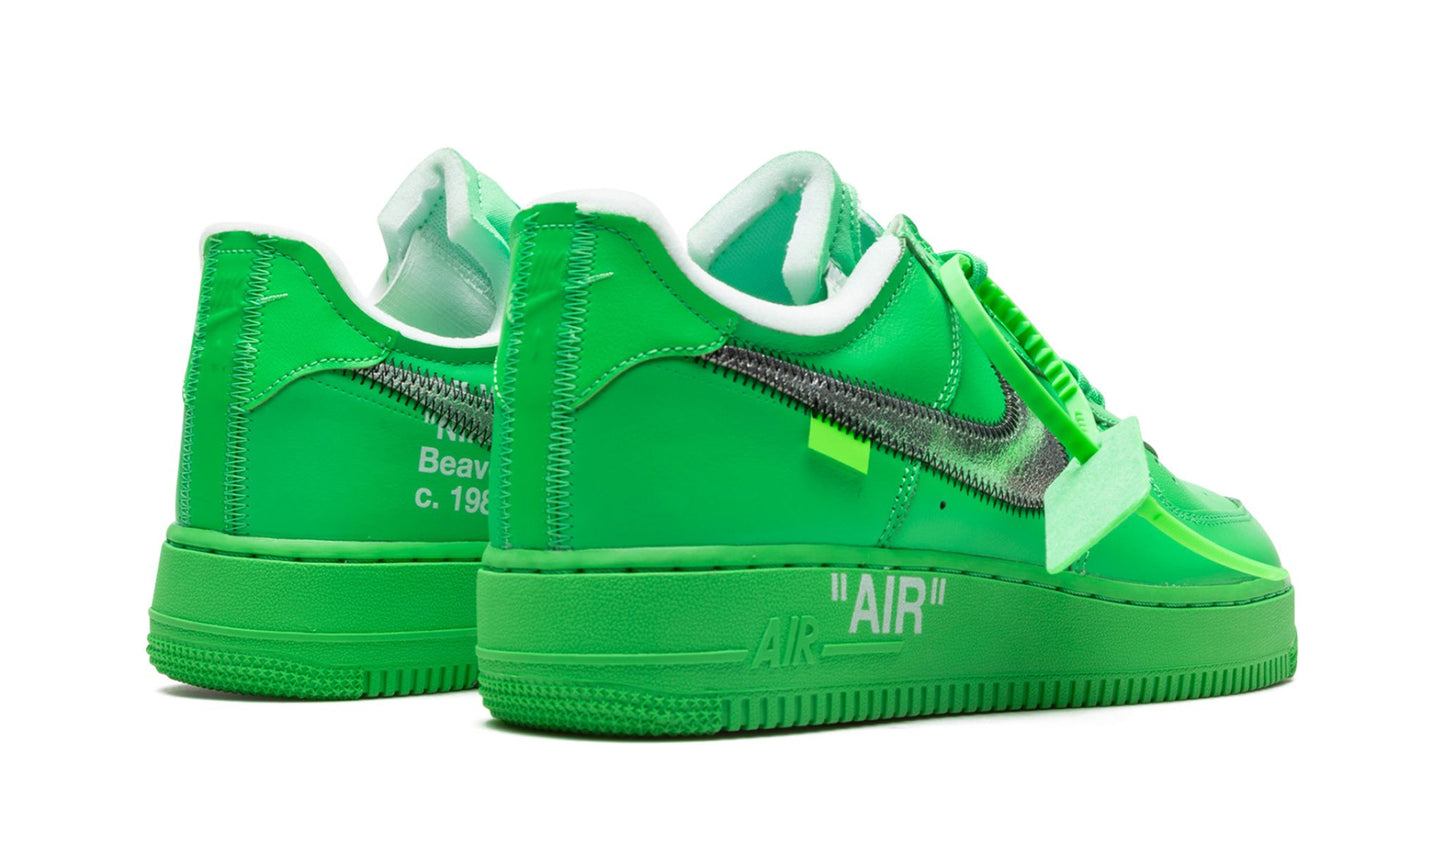 Nike Air Force 1 Low Off-White Verde deschis Spark BKM